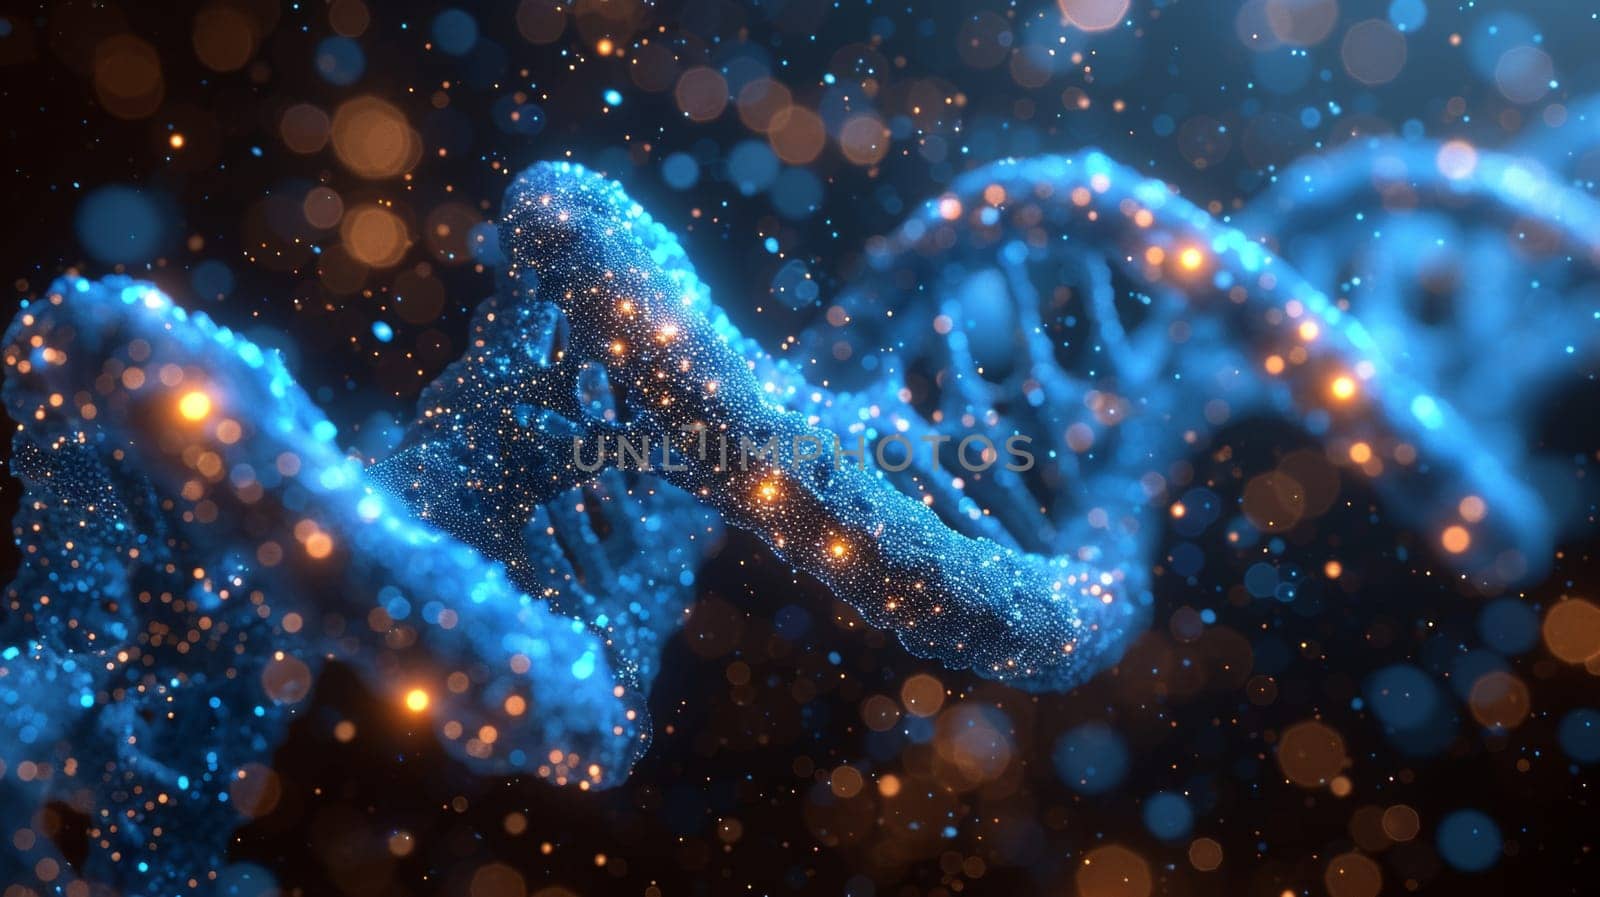 Digital background with dark blue and dark gray hues. Data Communication and Transfer of DNA Biology. Towards a futuristic view of information technology.